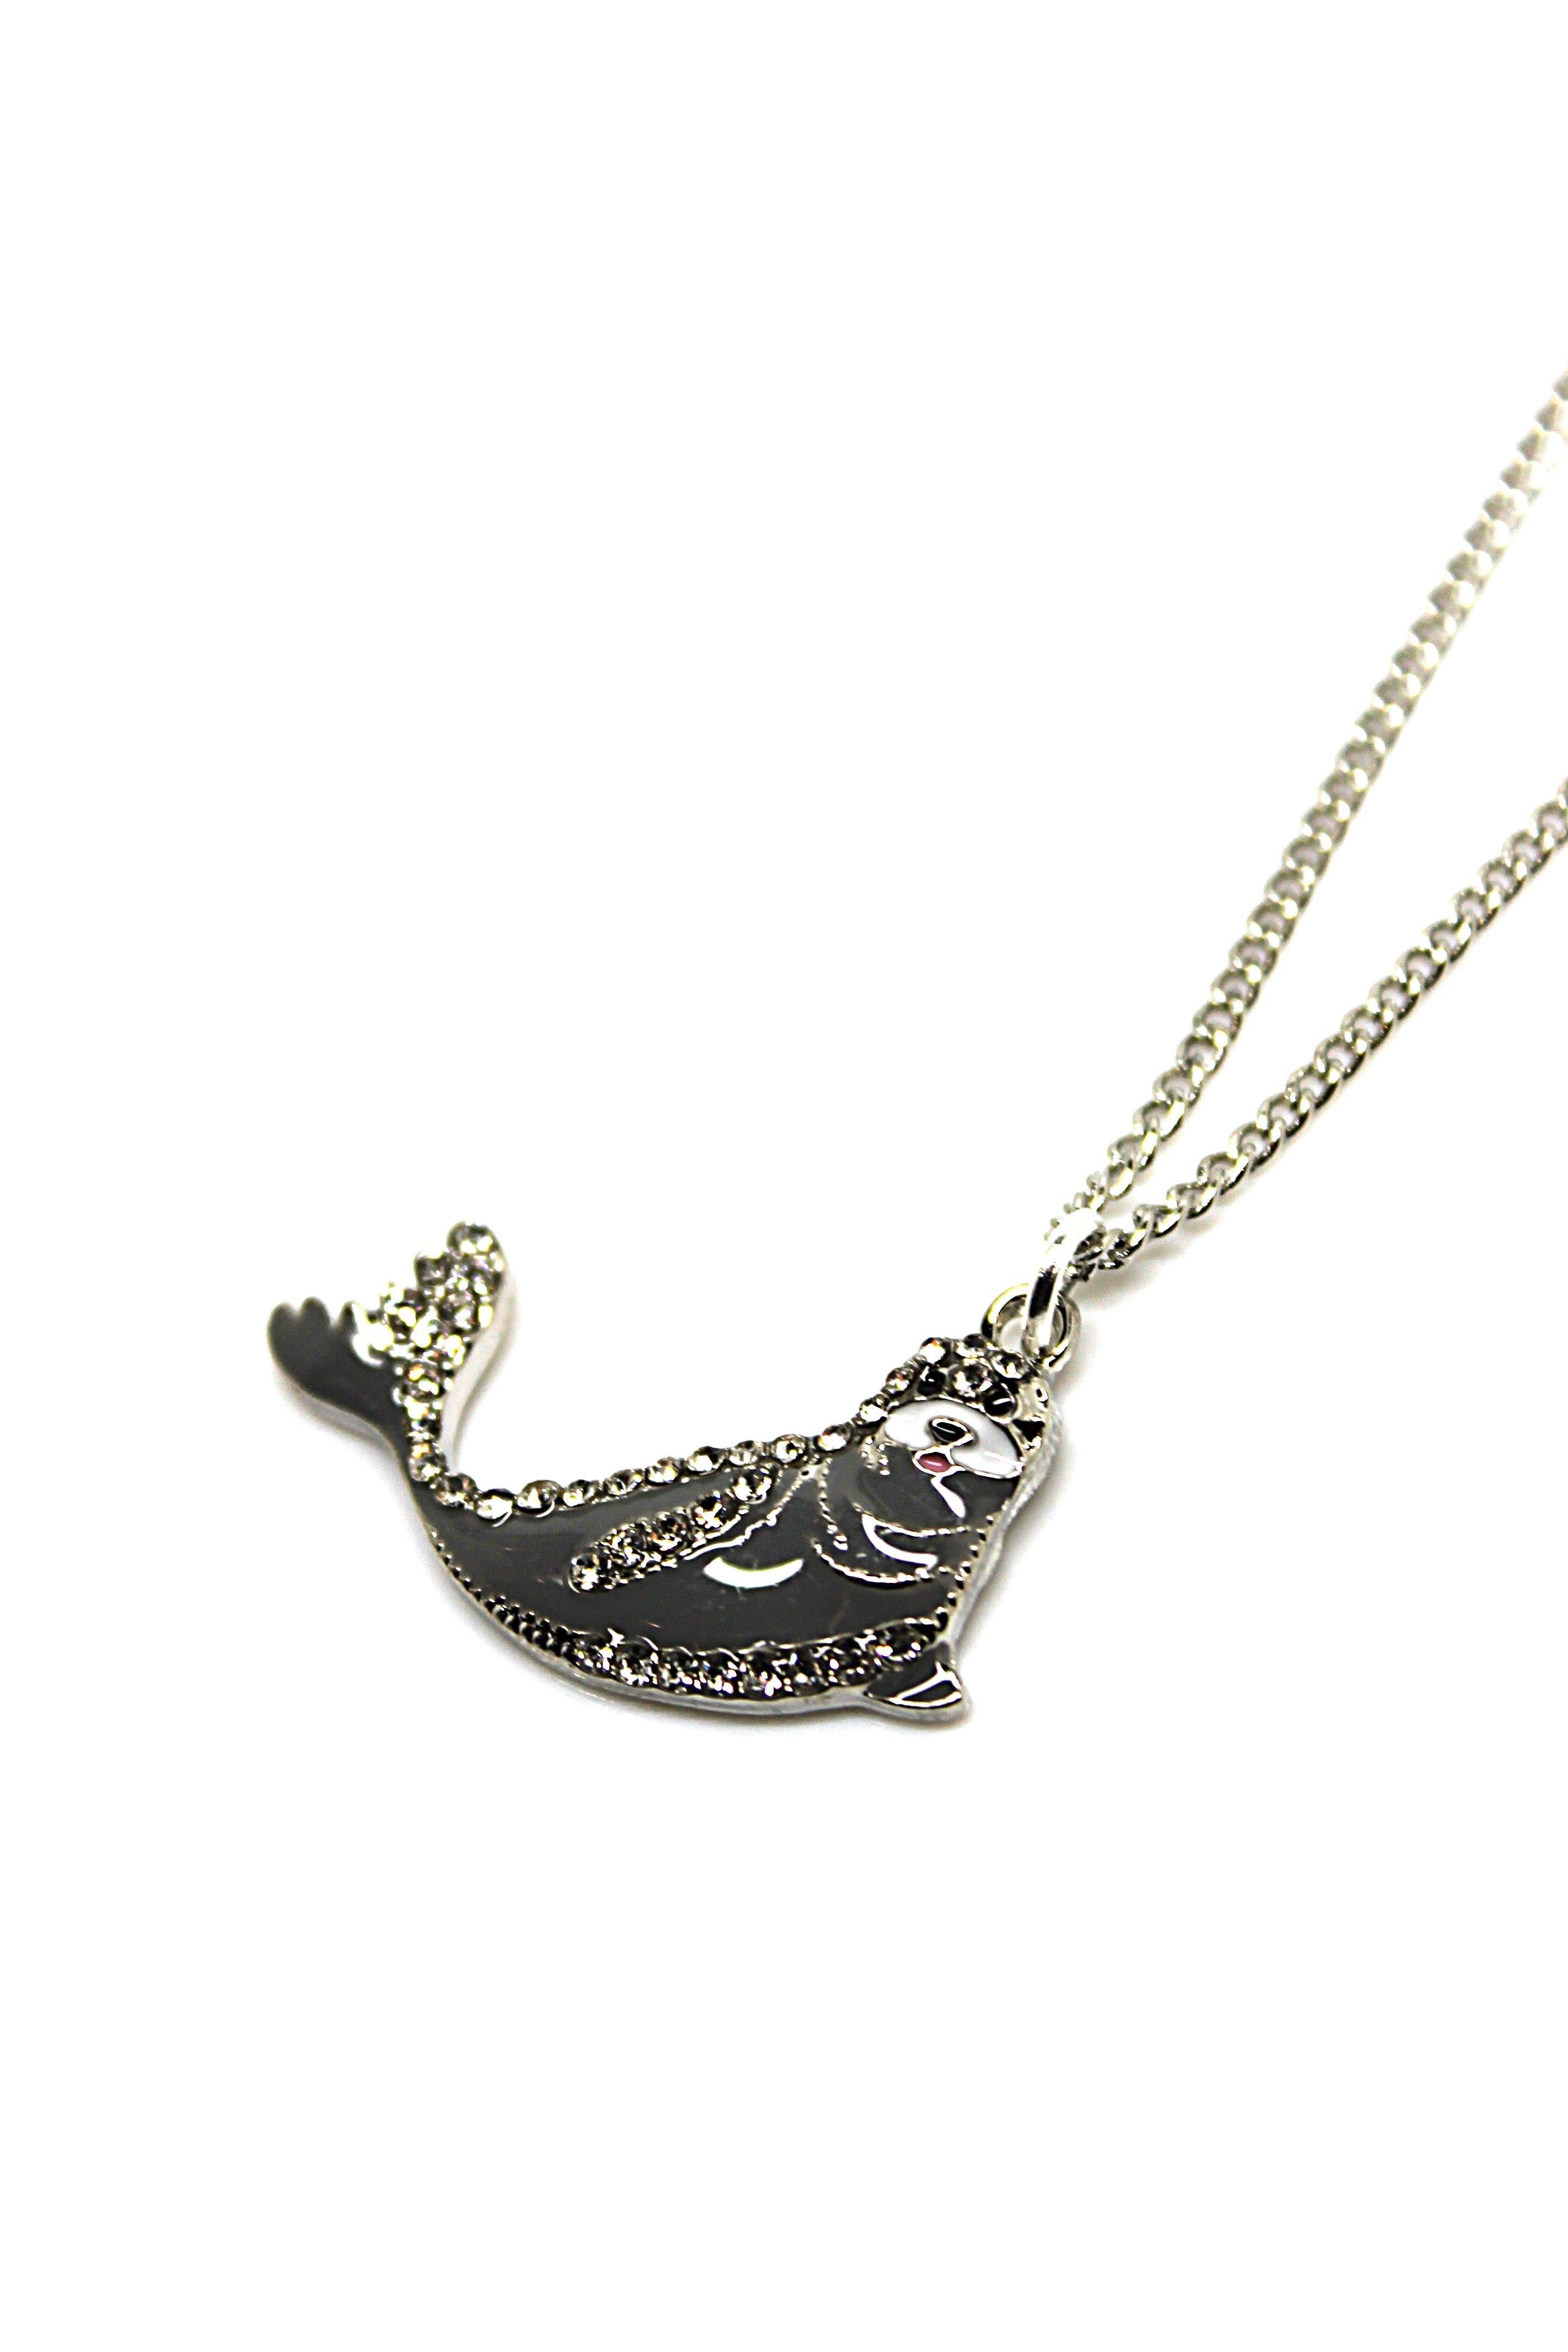 Sealion Necklace - Wildtouch - Wildtouch